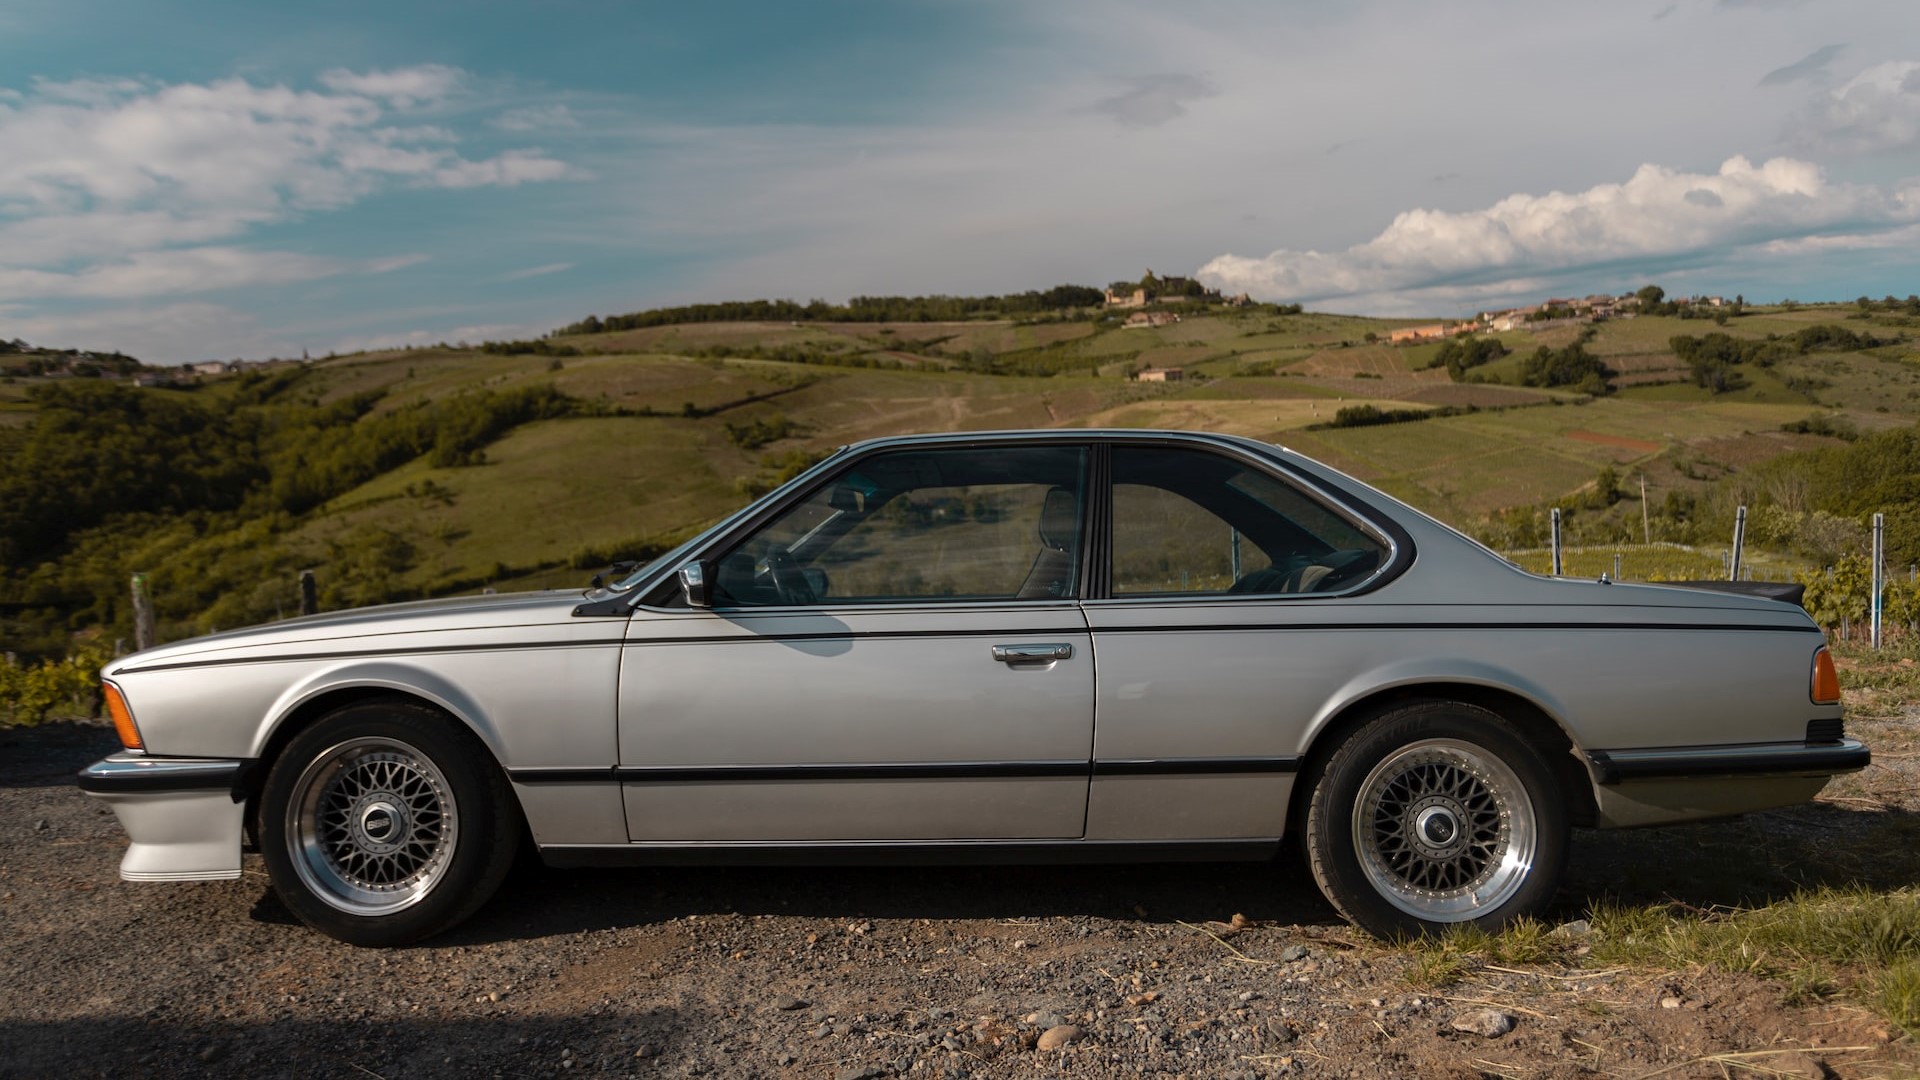 Silver Coupe parked on mountain | Goodwill Car Donations